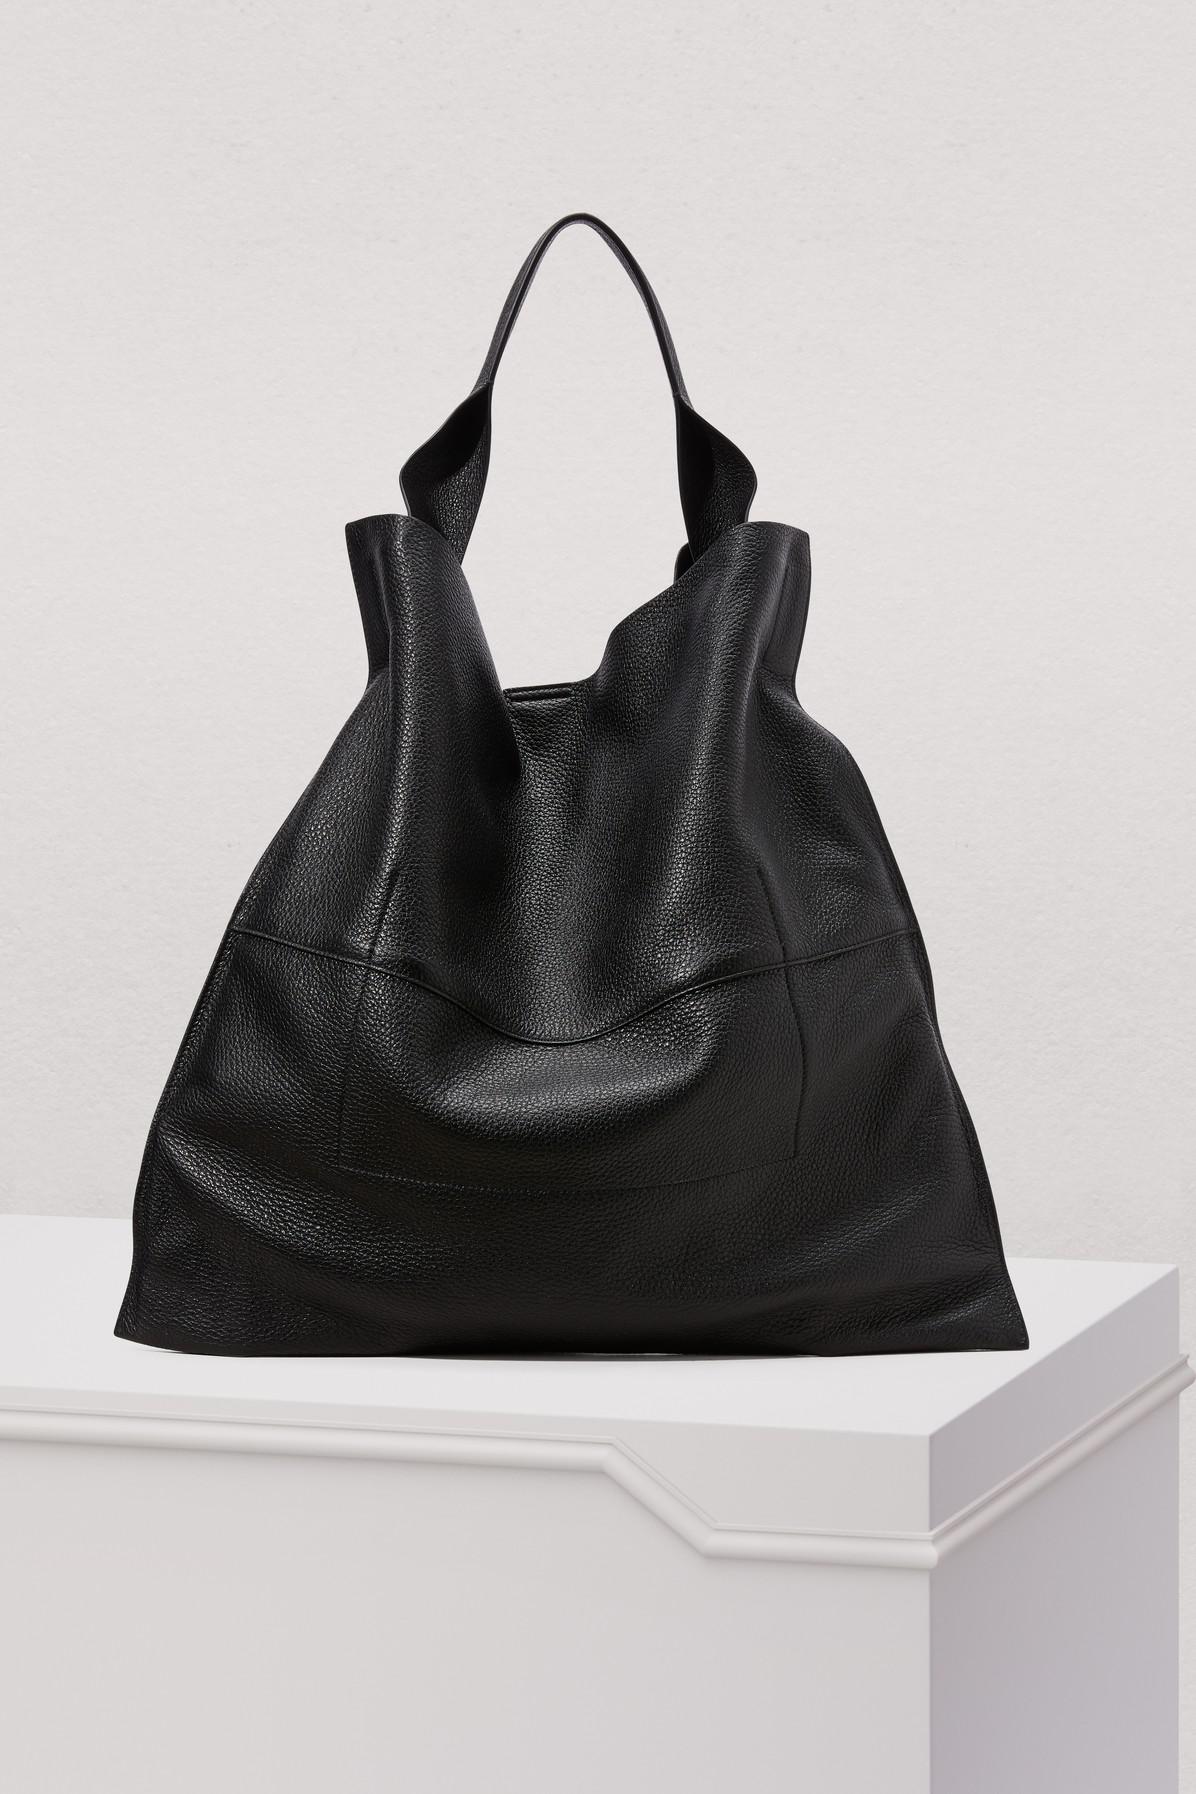 Jil Sander Xiao Leather Shopping Bag in Black - Lyst